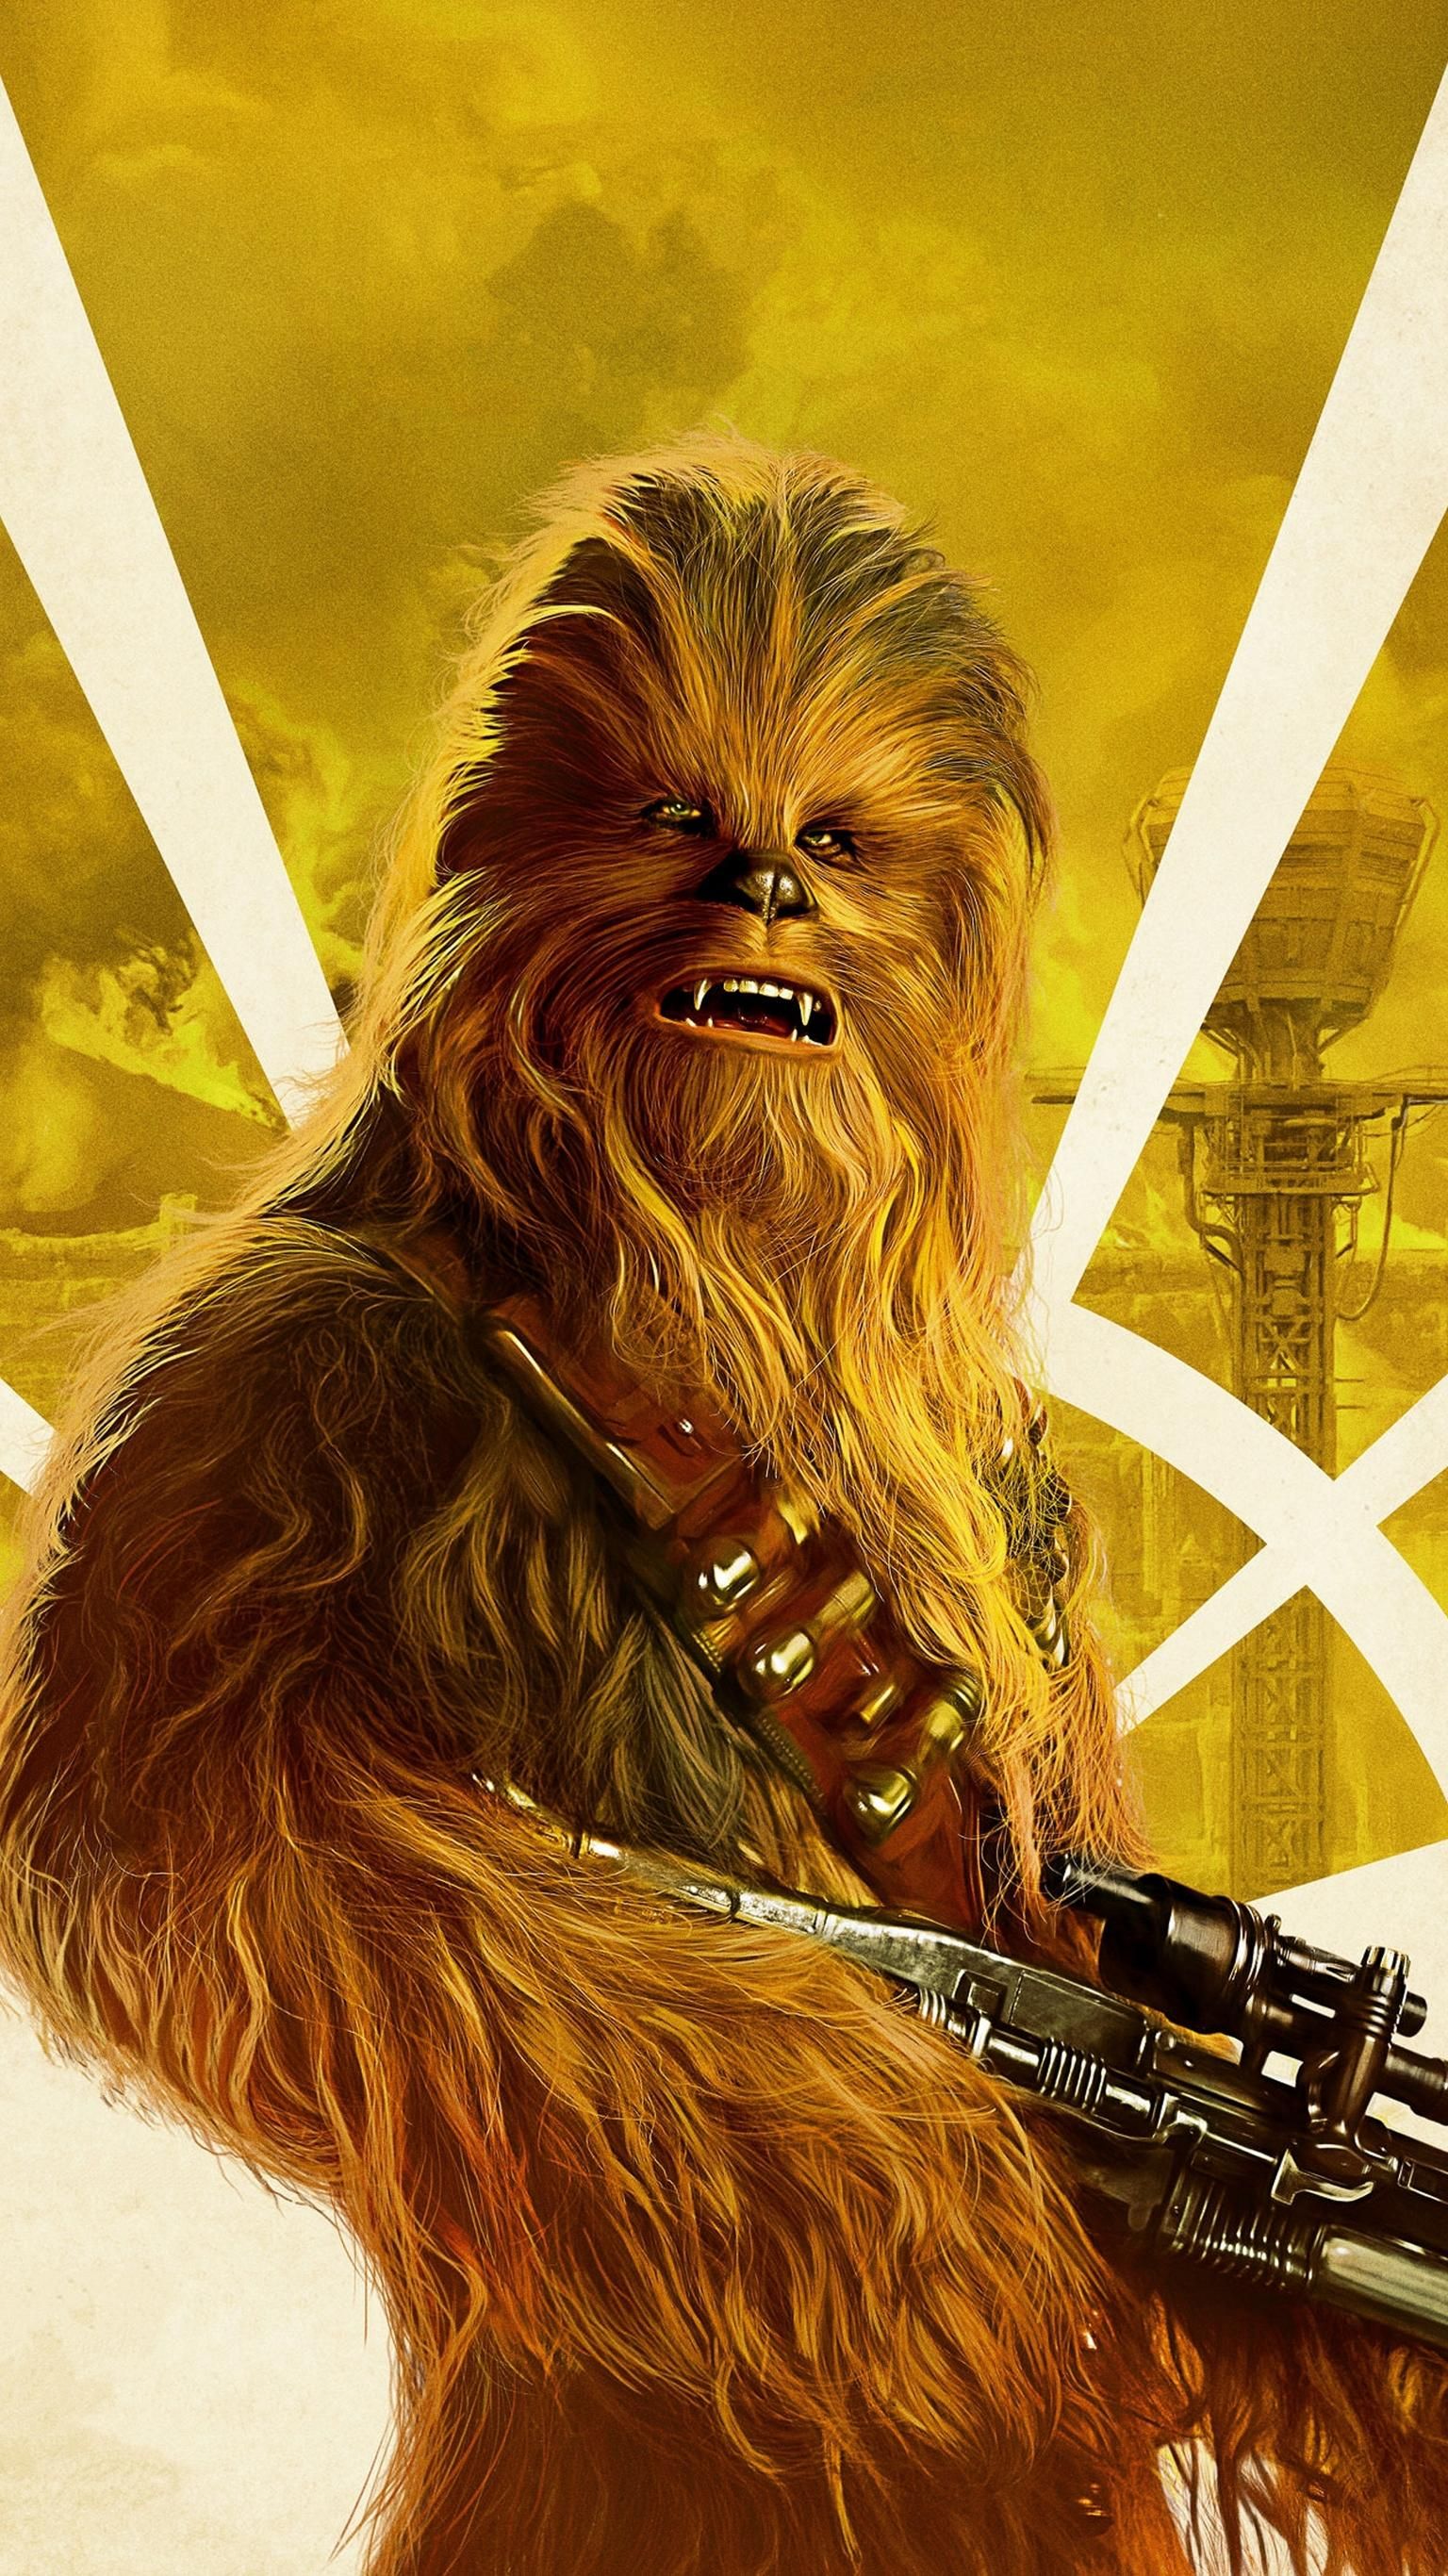 Han Solo And Chewbacca In Solo A Star Wars Story Wallpapers